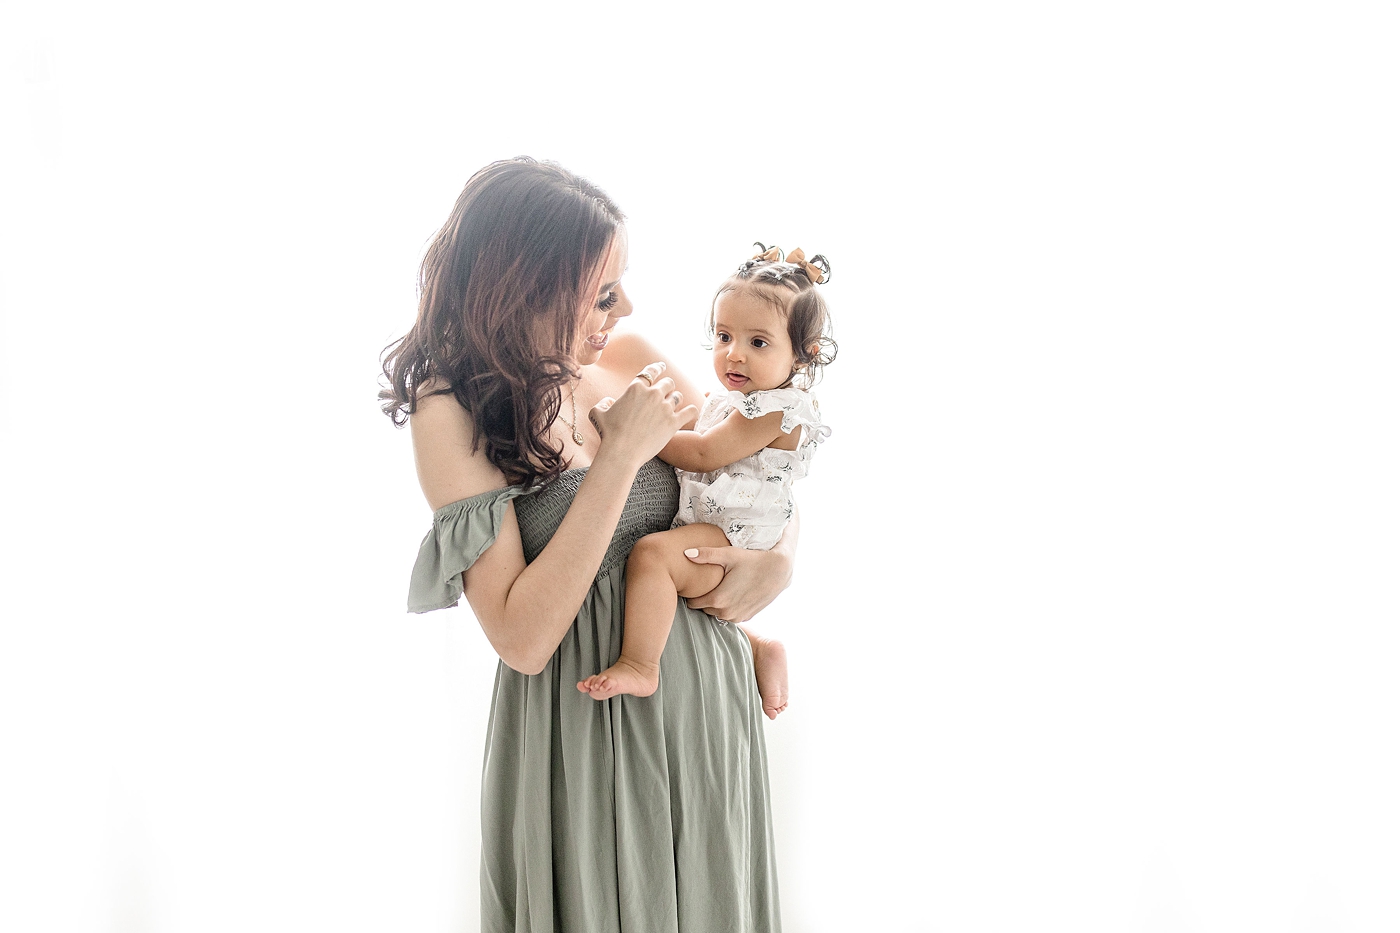 Mom holds her baby in studio during baby photography miami session. Photo by Ivanna Vidal Photography.